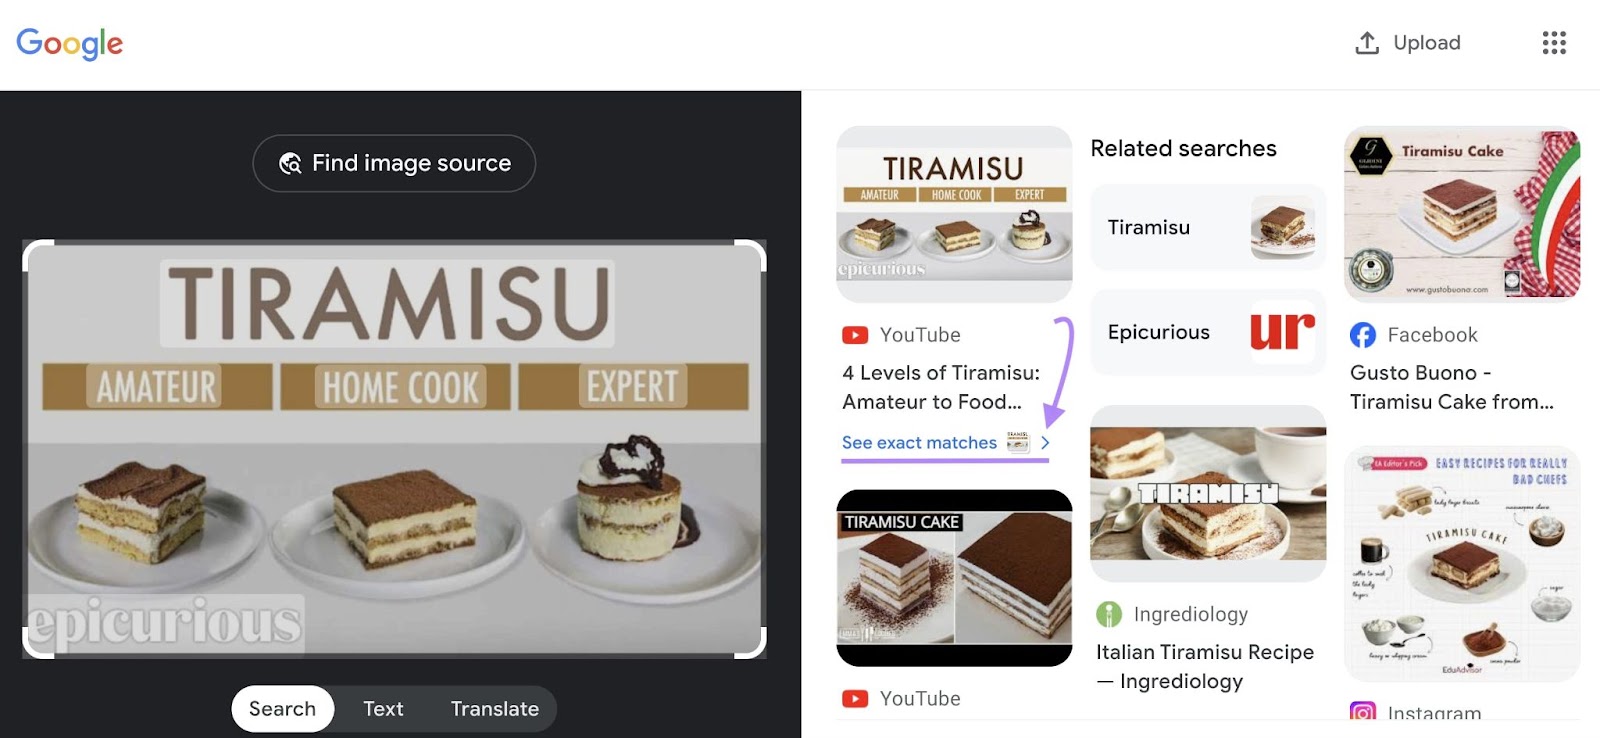 Google images video search for Tiramisu Epicurious video with 'see exact matches' highlighted